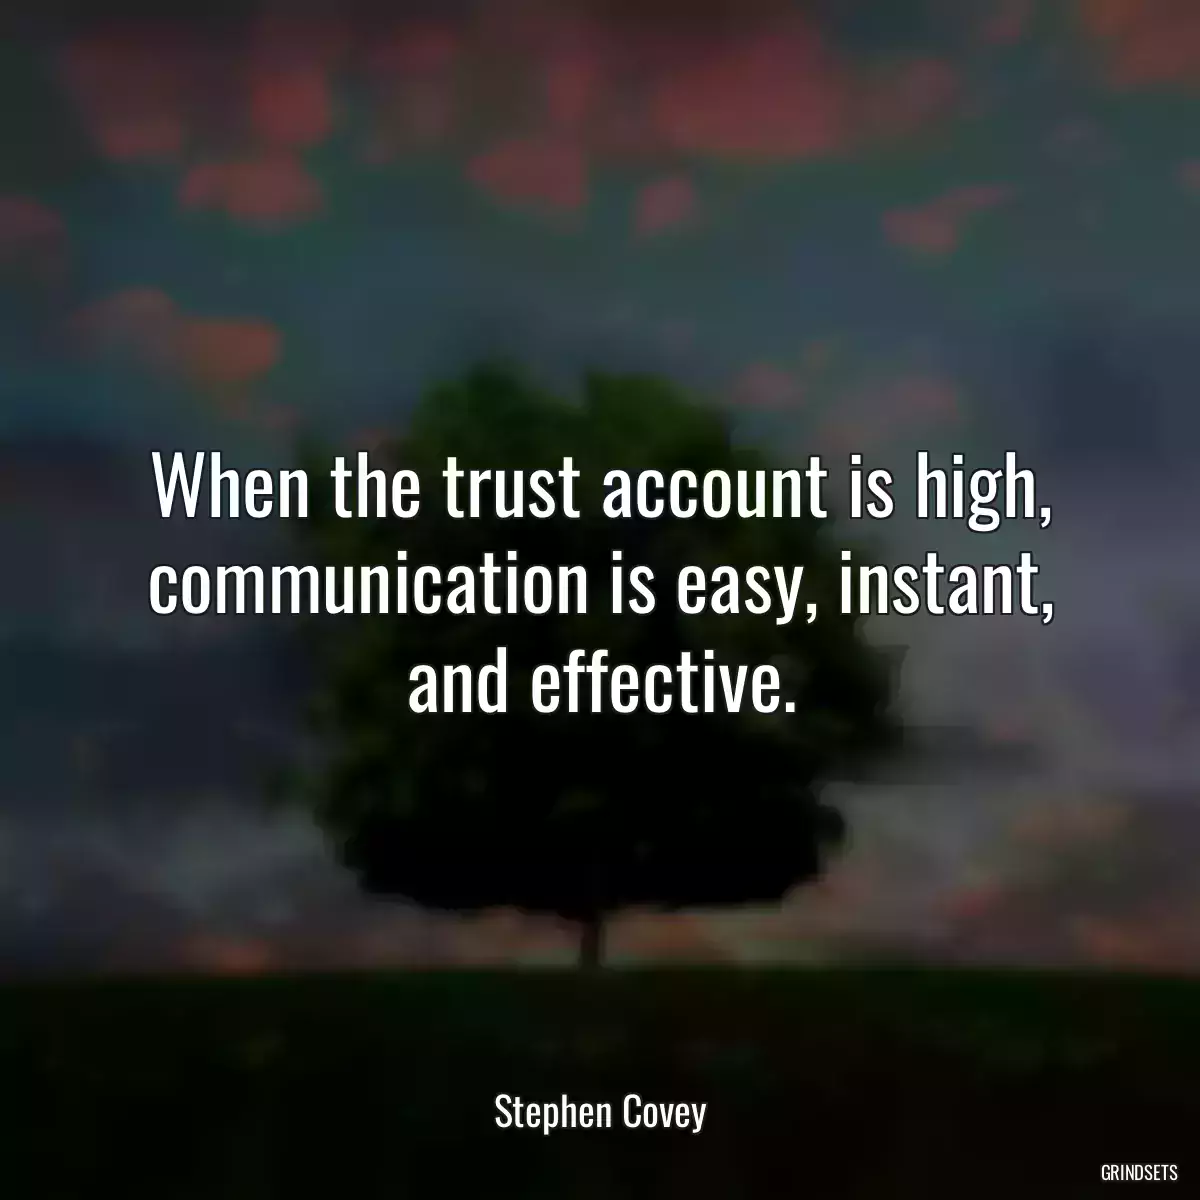 When the trust account is high, communication is easy, instant, and effective.